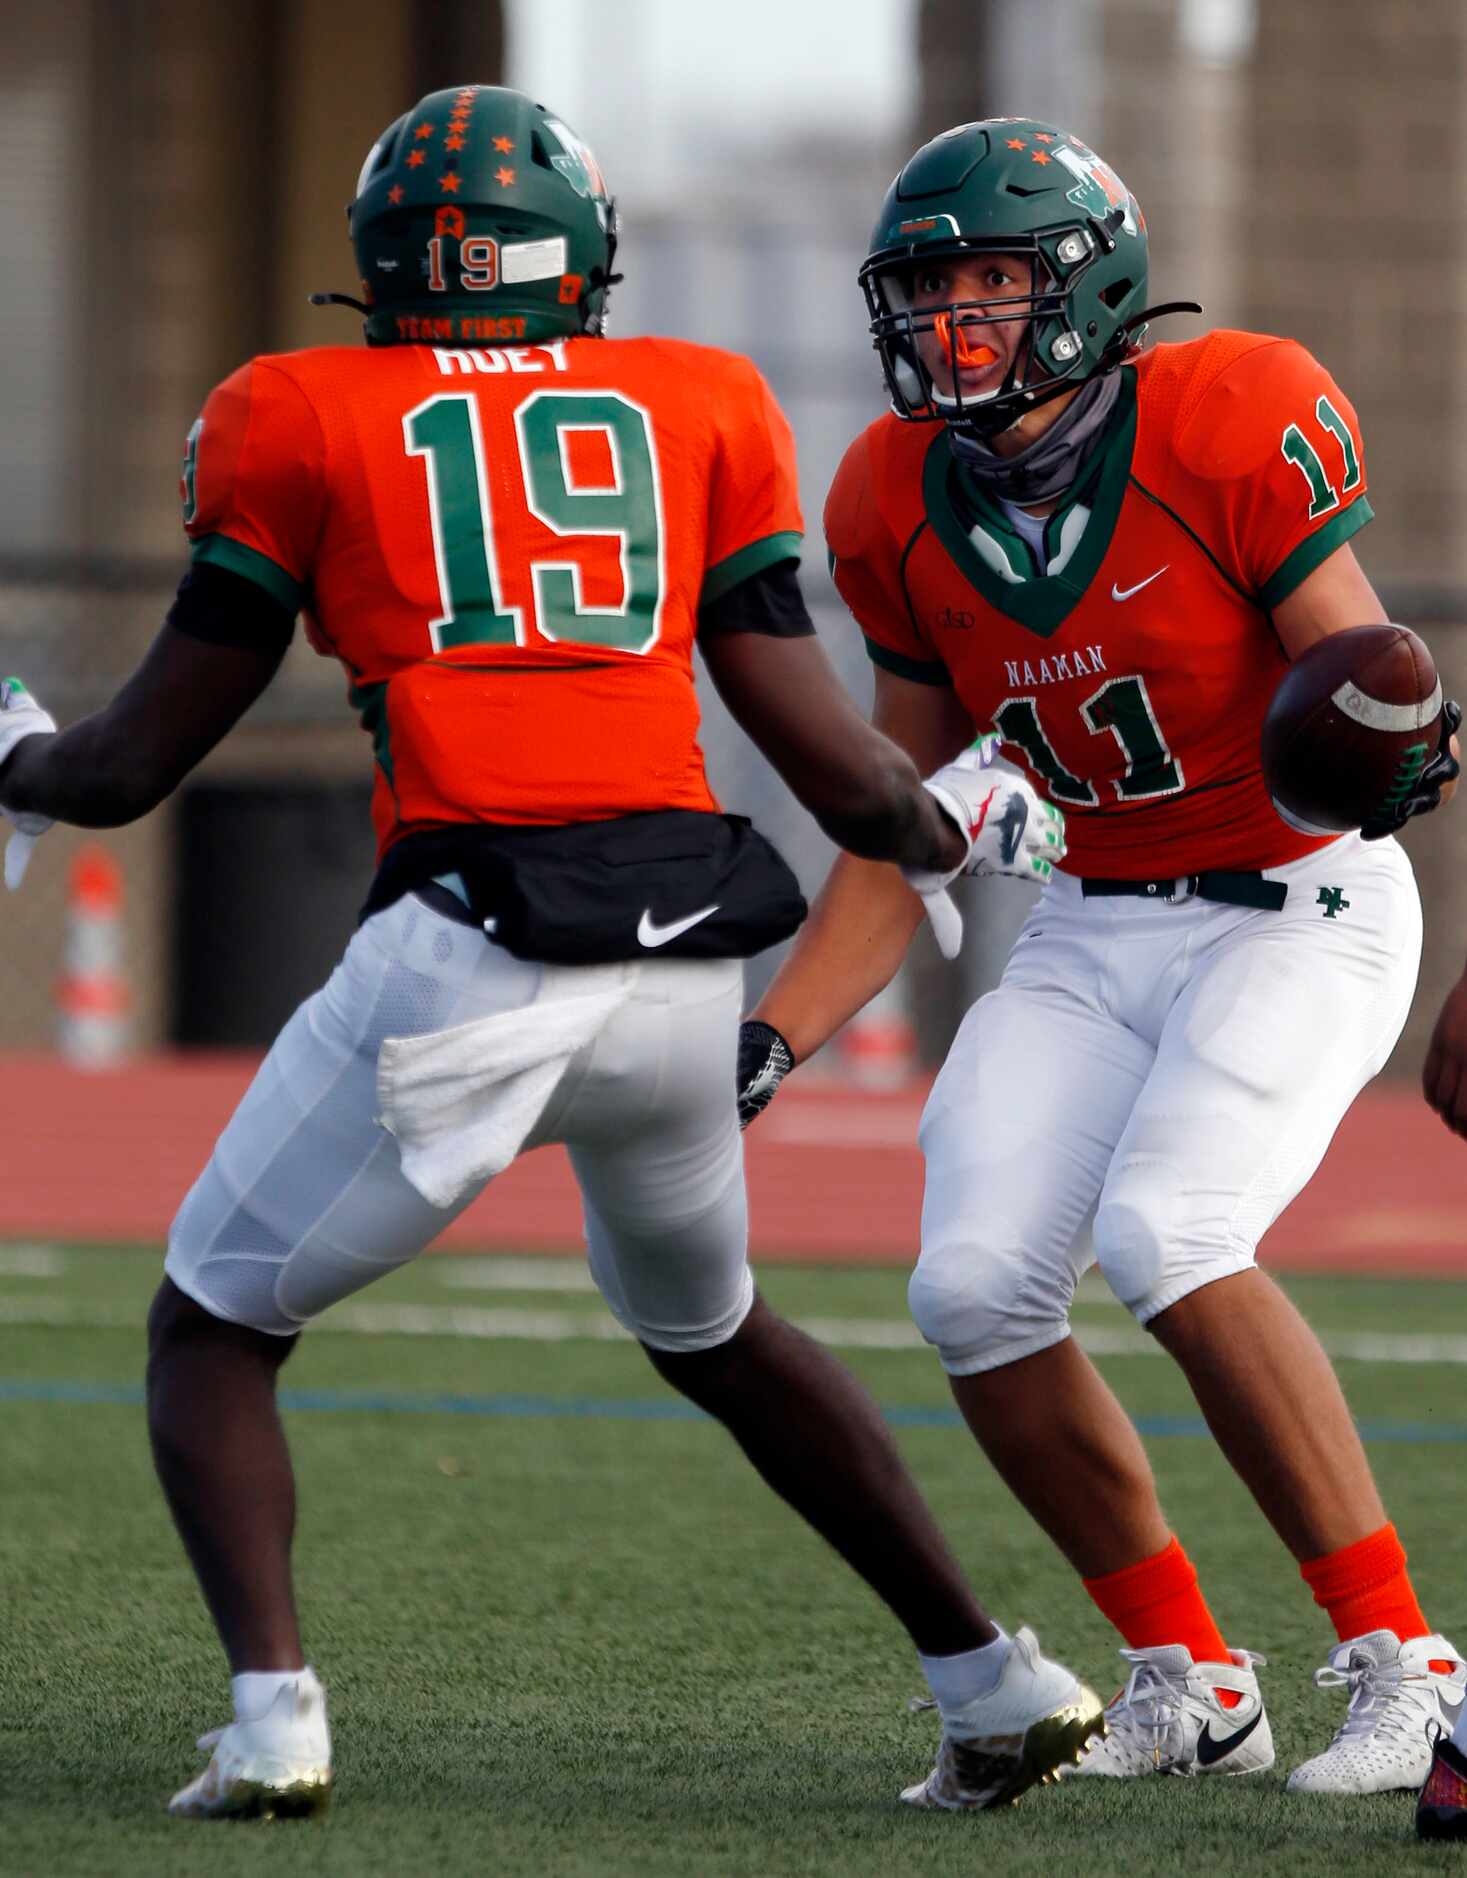 Naaman Forest’s Devean Deal (11) celebrates with teammate Brison  Huey (19), after catching...